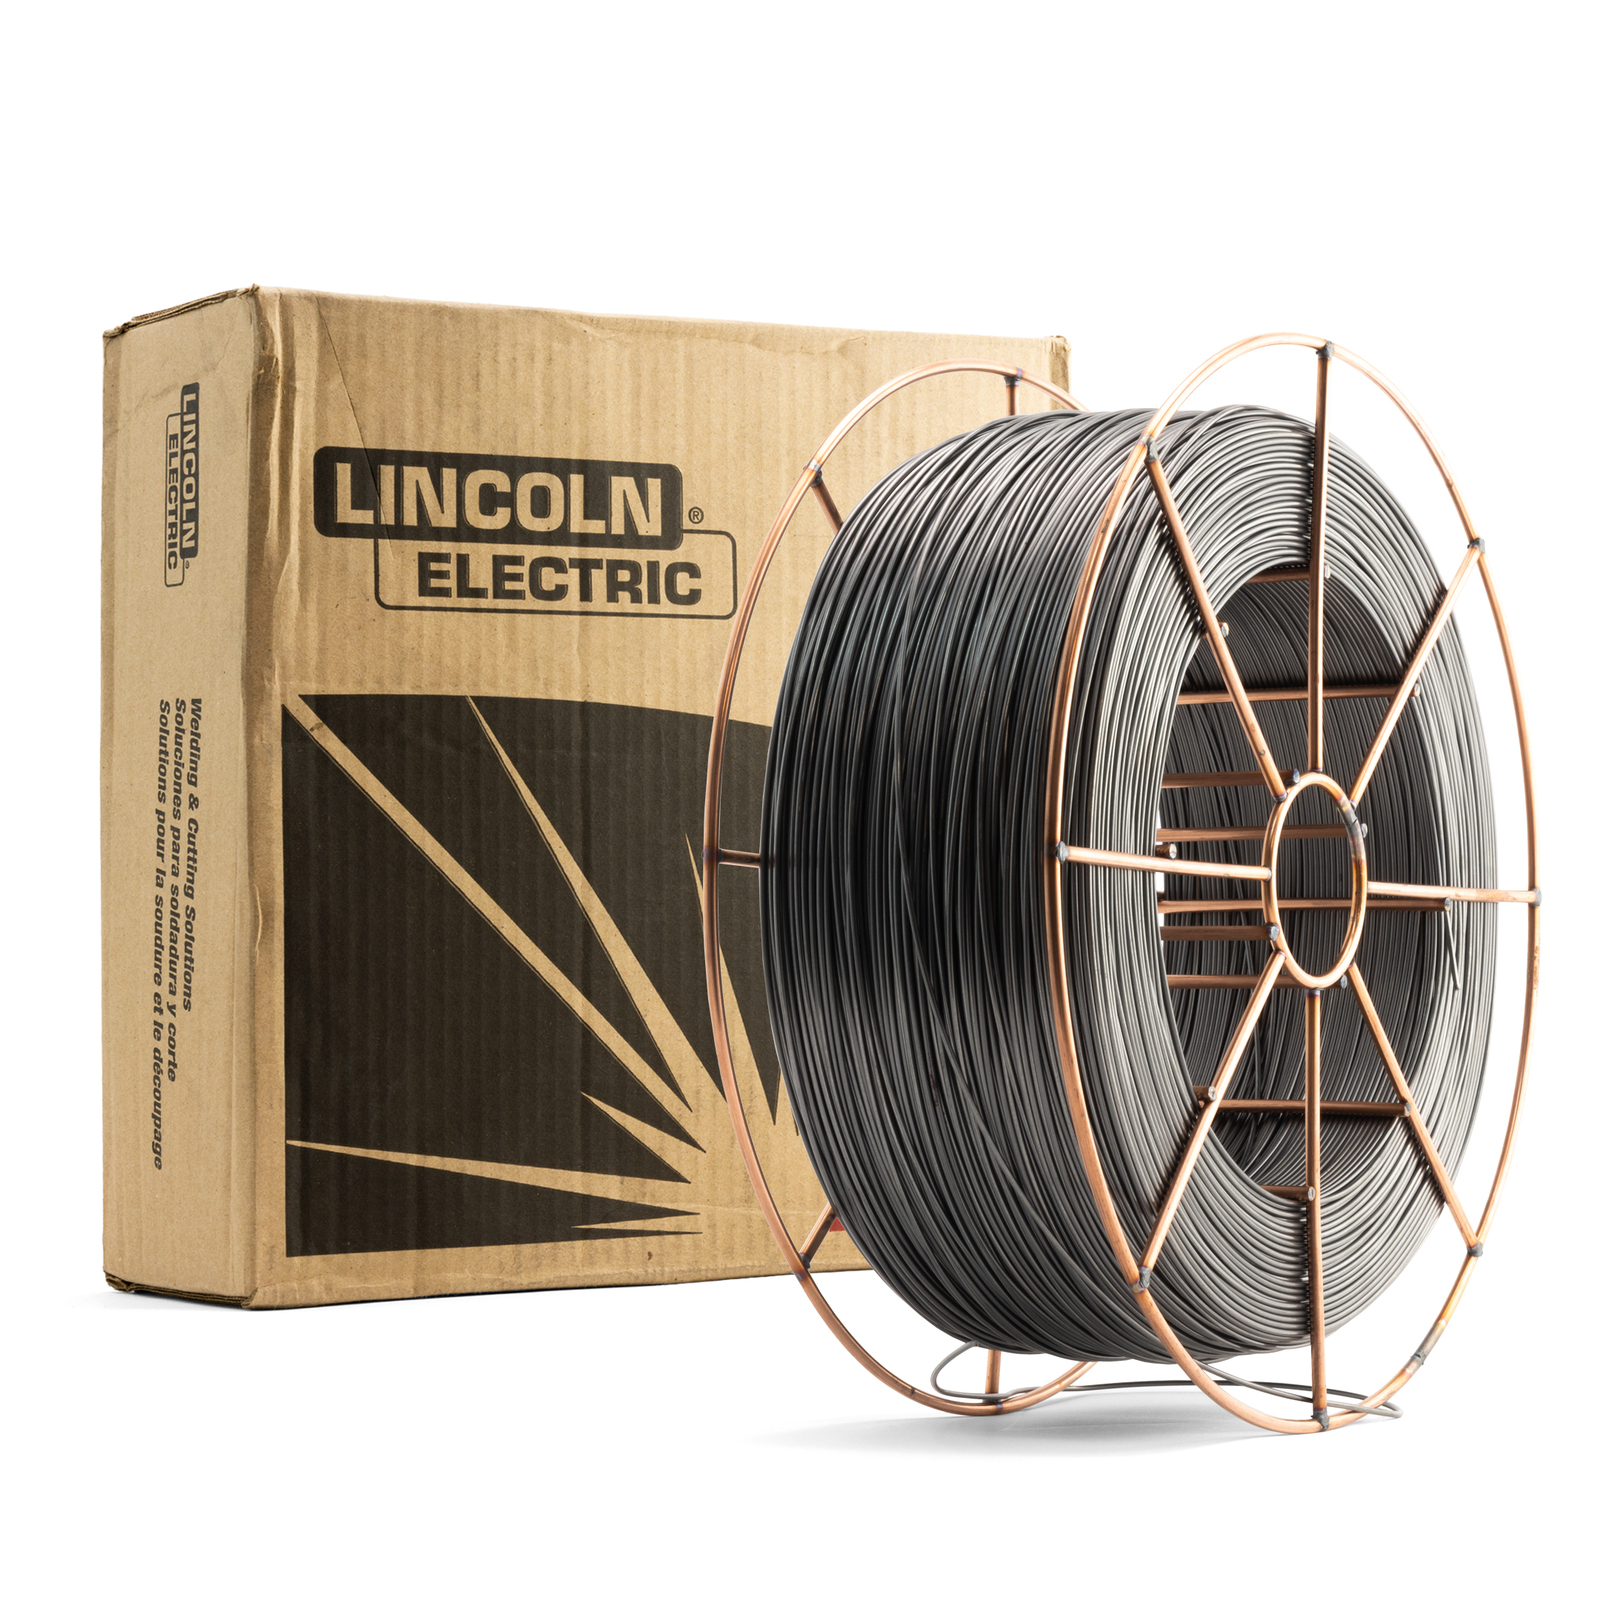 11.3kg - 1.7mm Lincoln Innershield NR-211MP Mig Wire